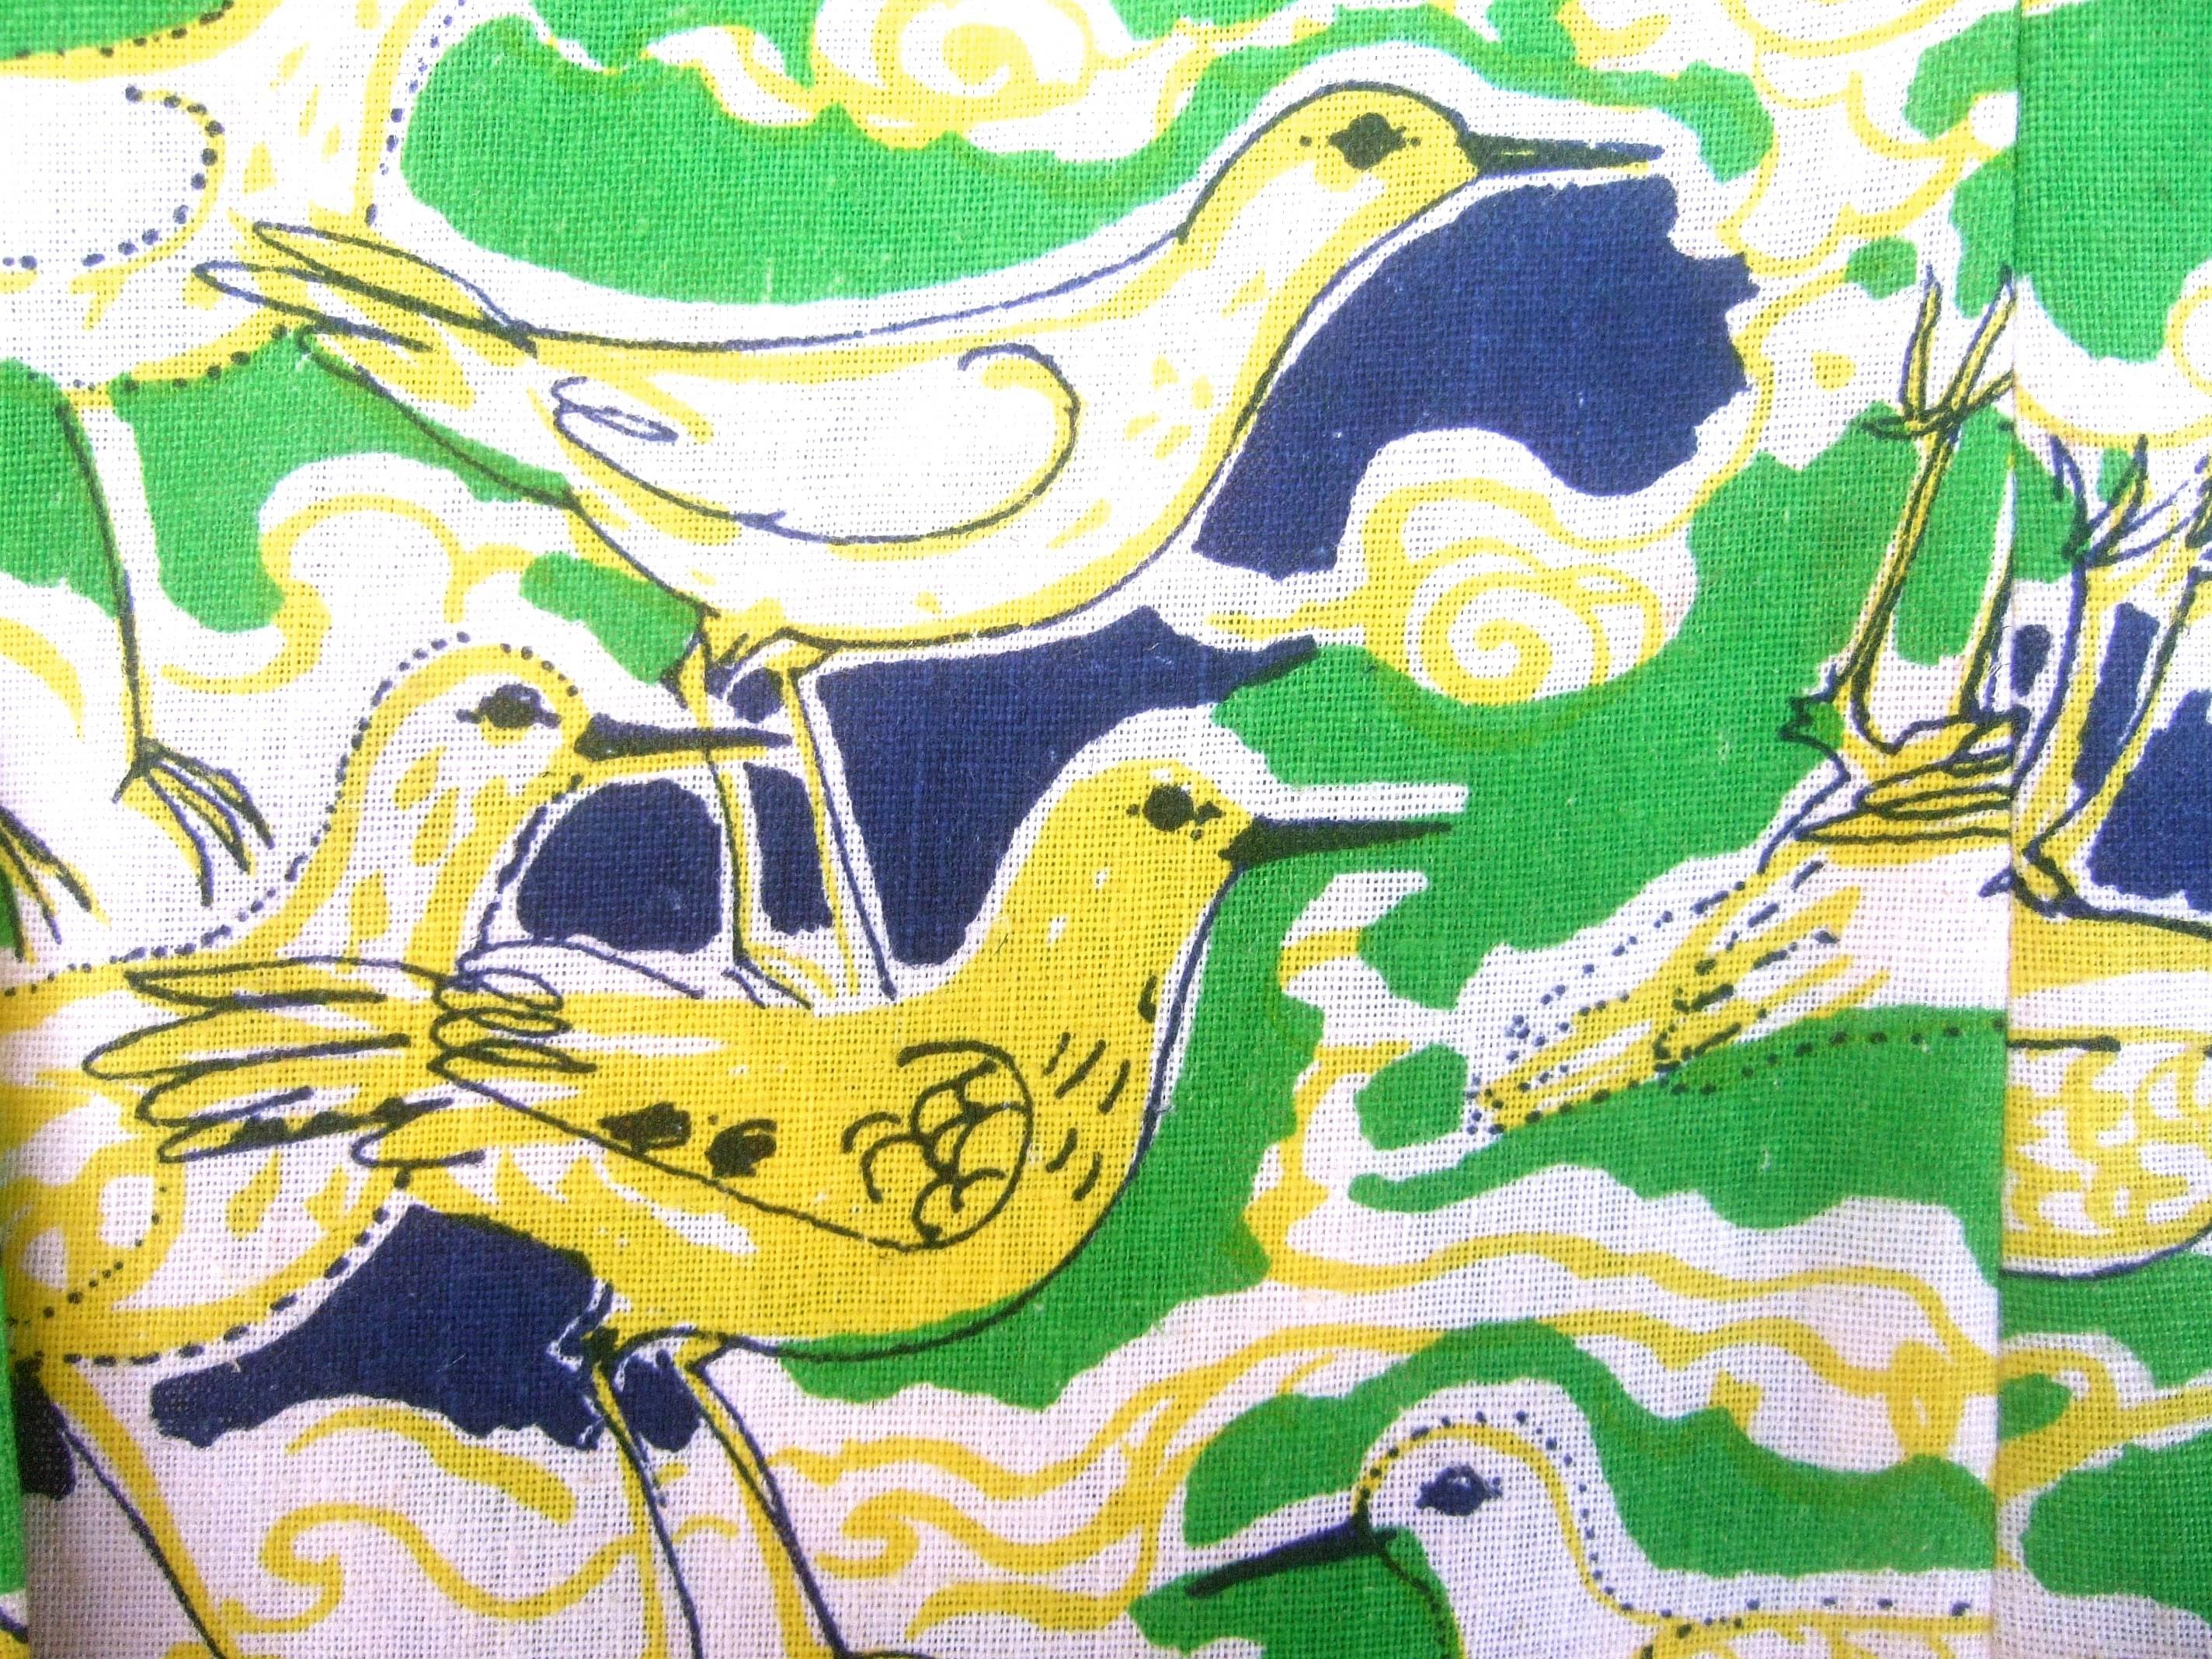 Lilly Pulitzer Men's Whimsical Seagull Print Jacket ca 1970 1